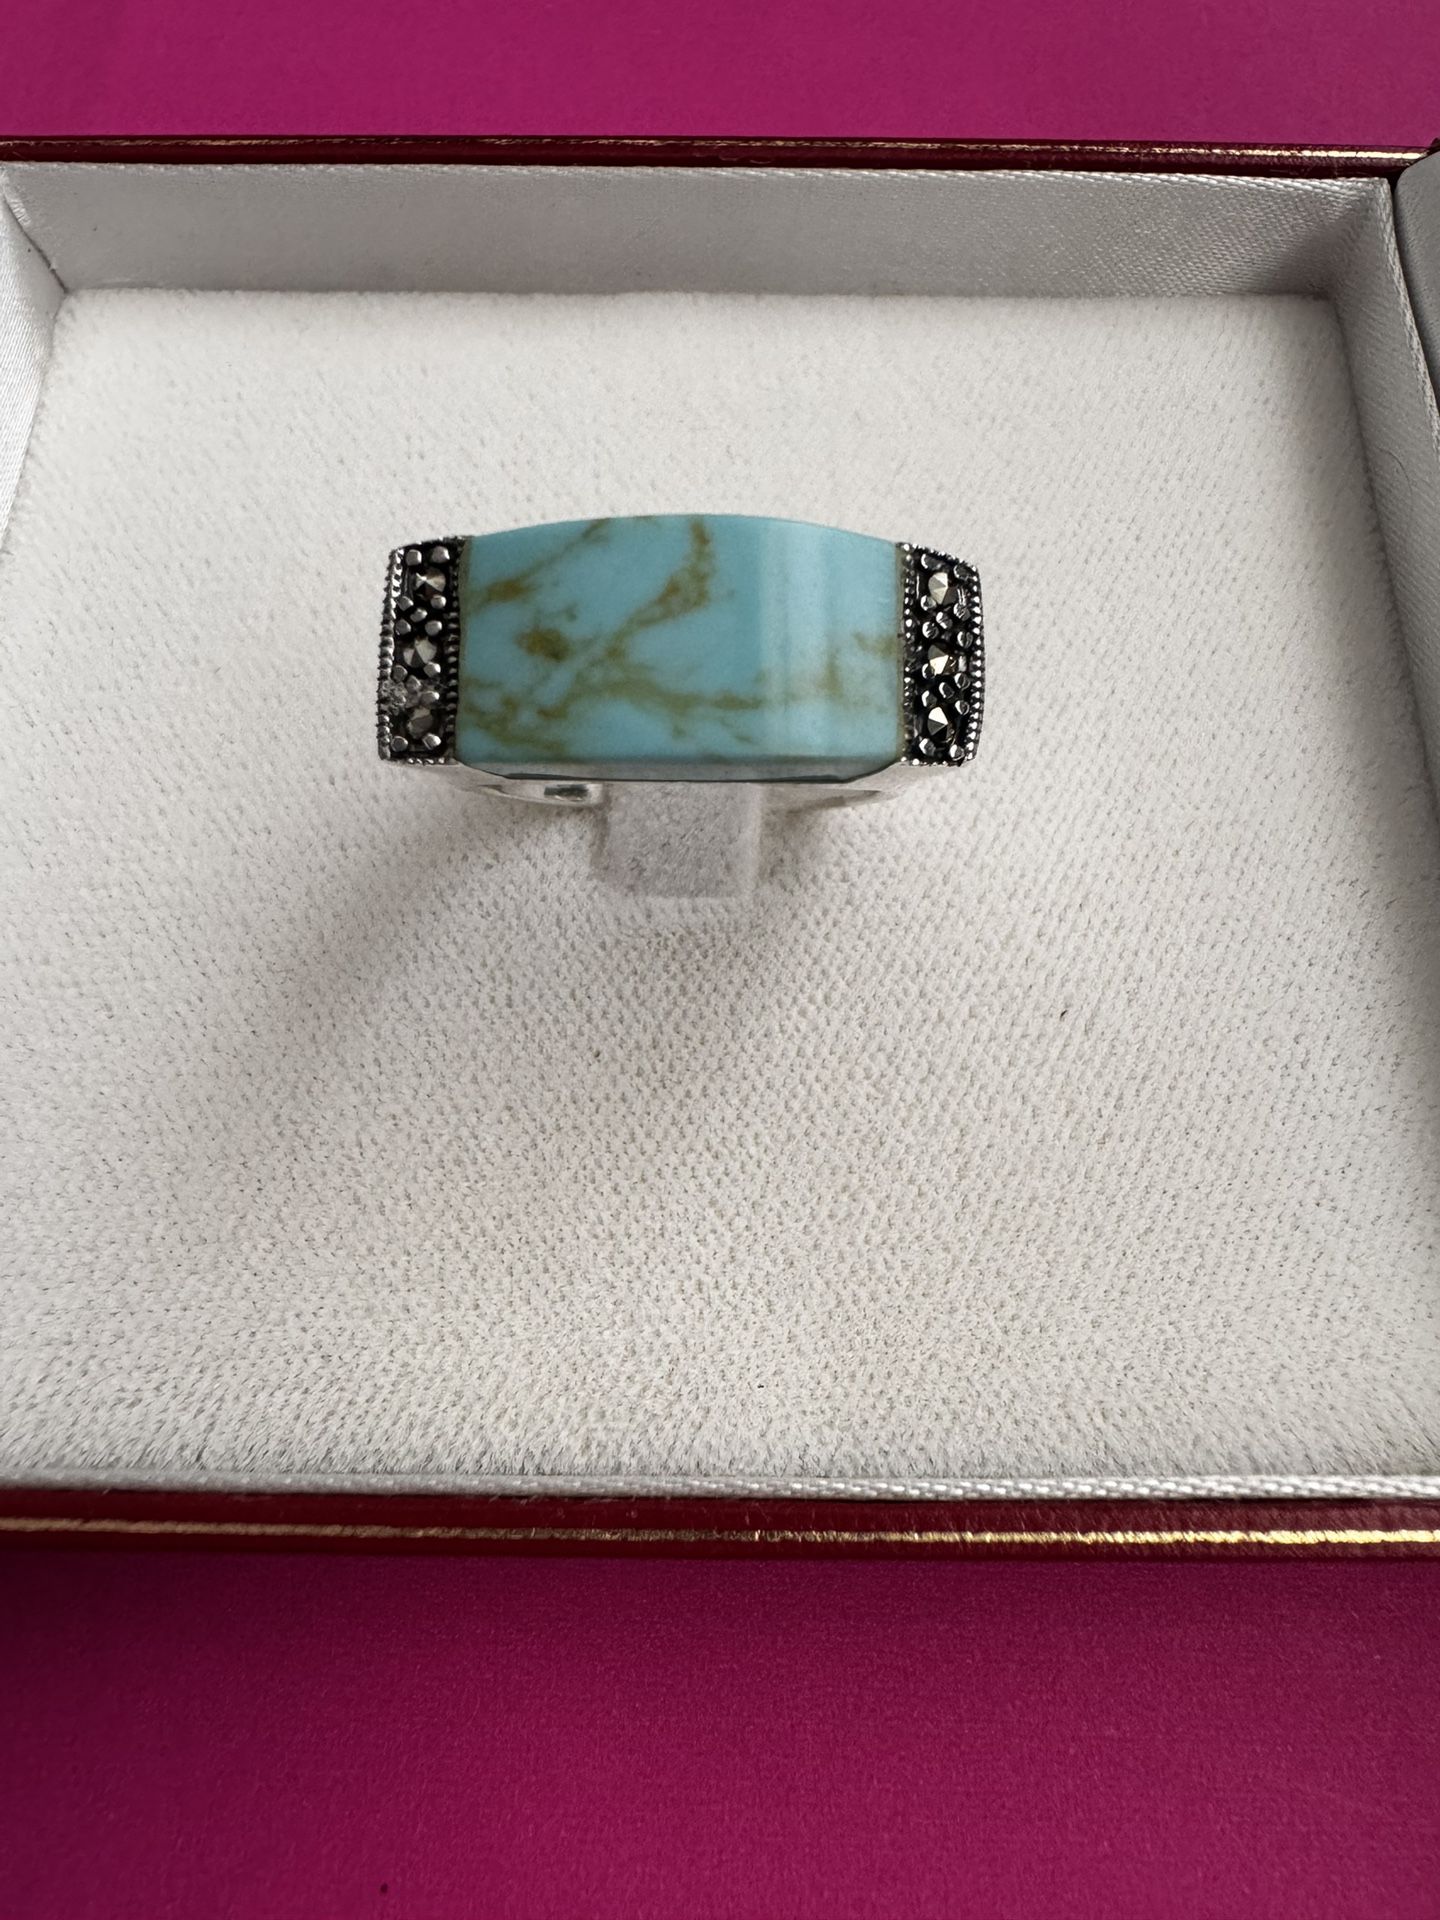 Vintage 925 sterling silver turquoise ring Slimline Turquoise Ring size 8.5 with 3 stones on each side In great condition